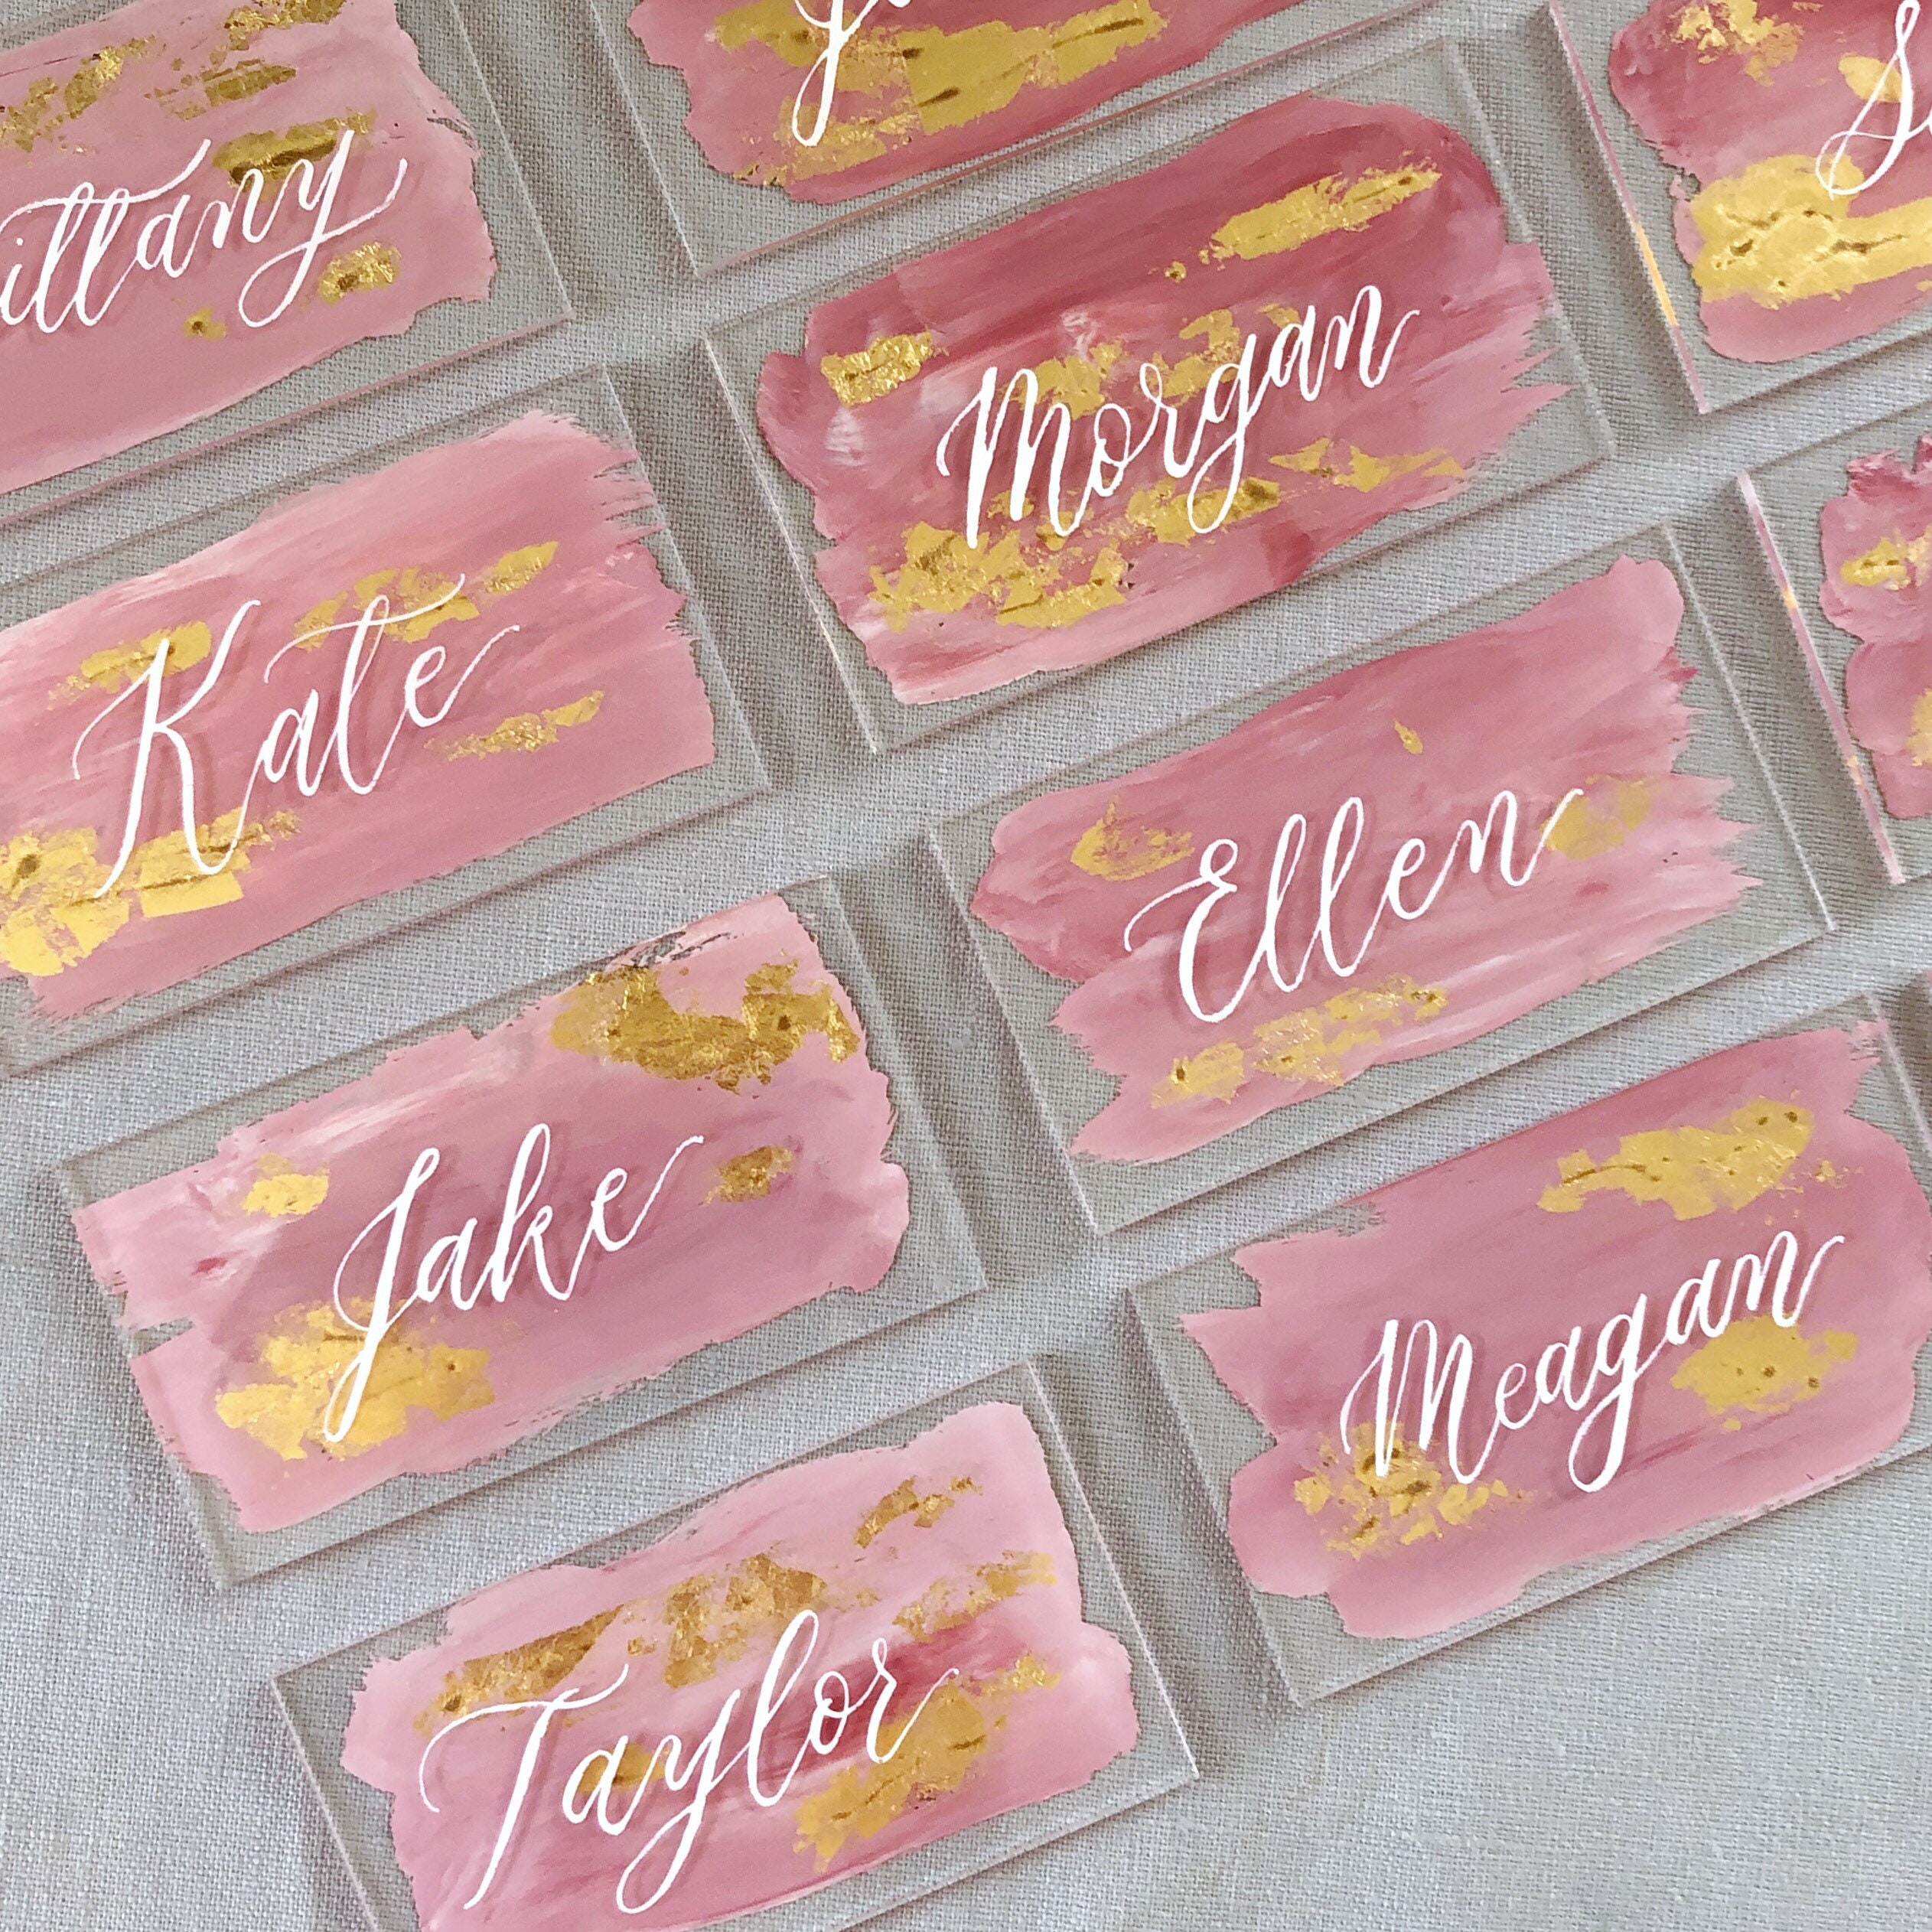 Acrylic Place Cards Wedding Place Cards Table name Escort Cards Personalised Place cards| Wedding name cards